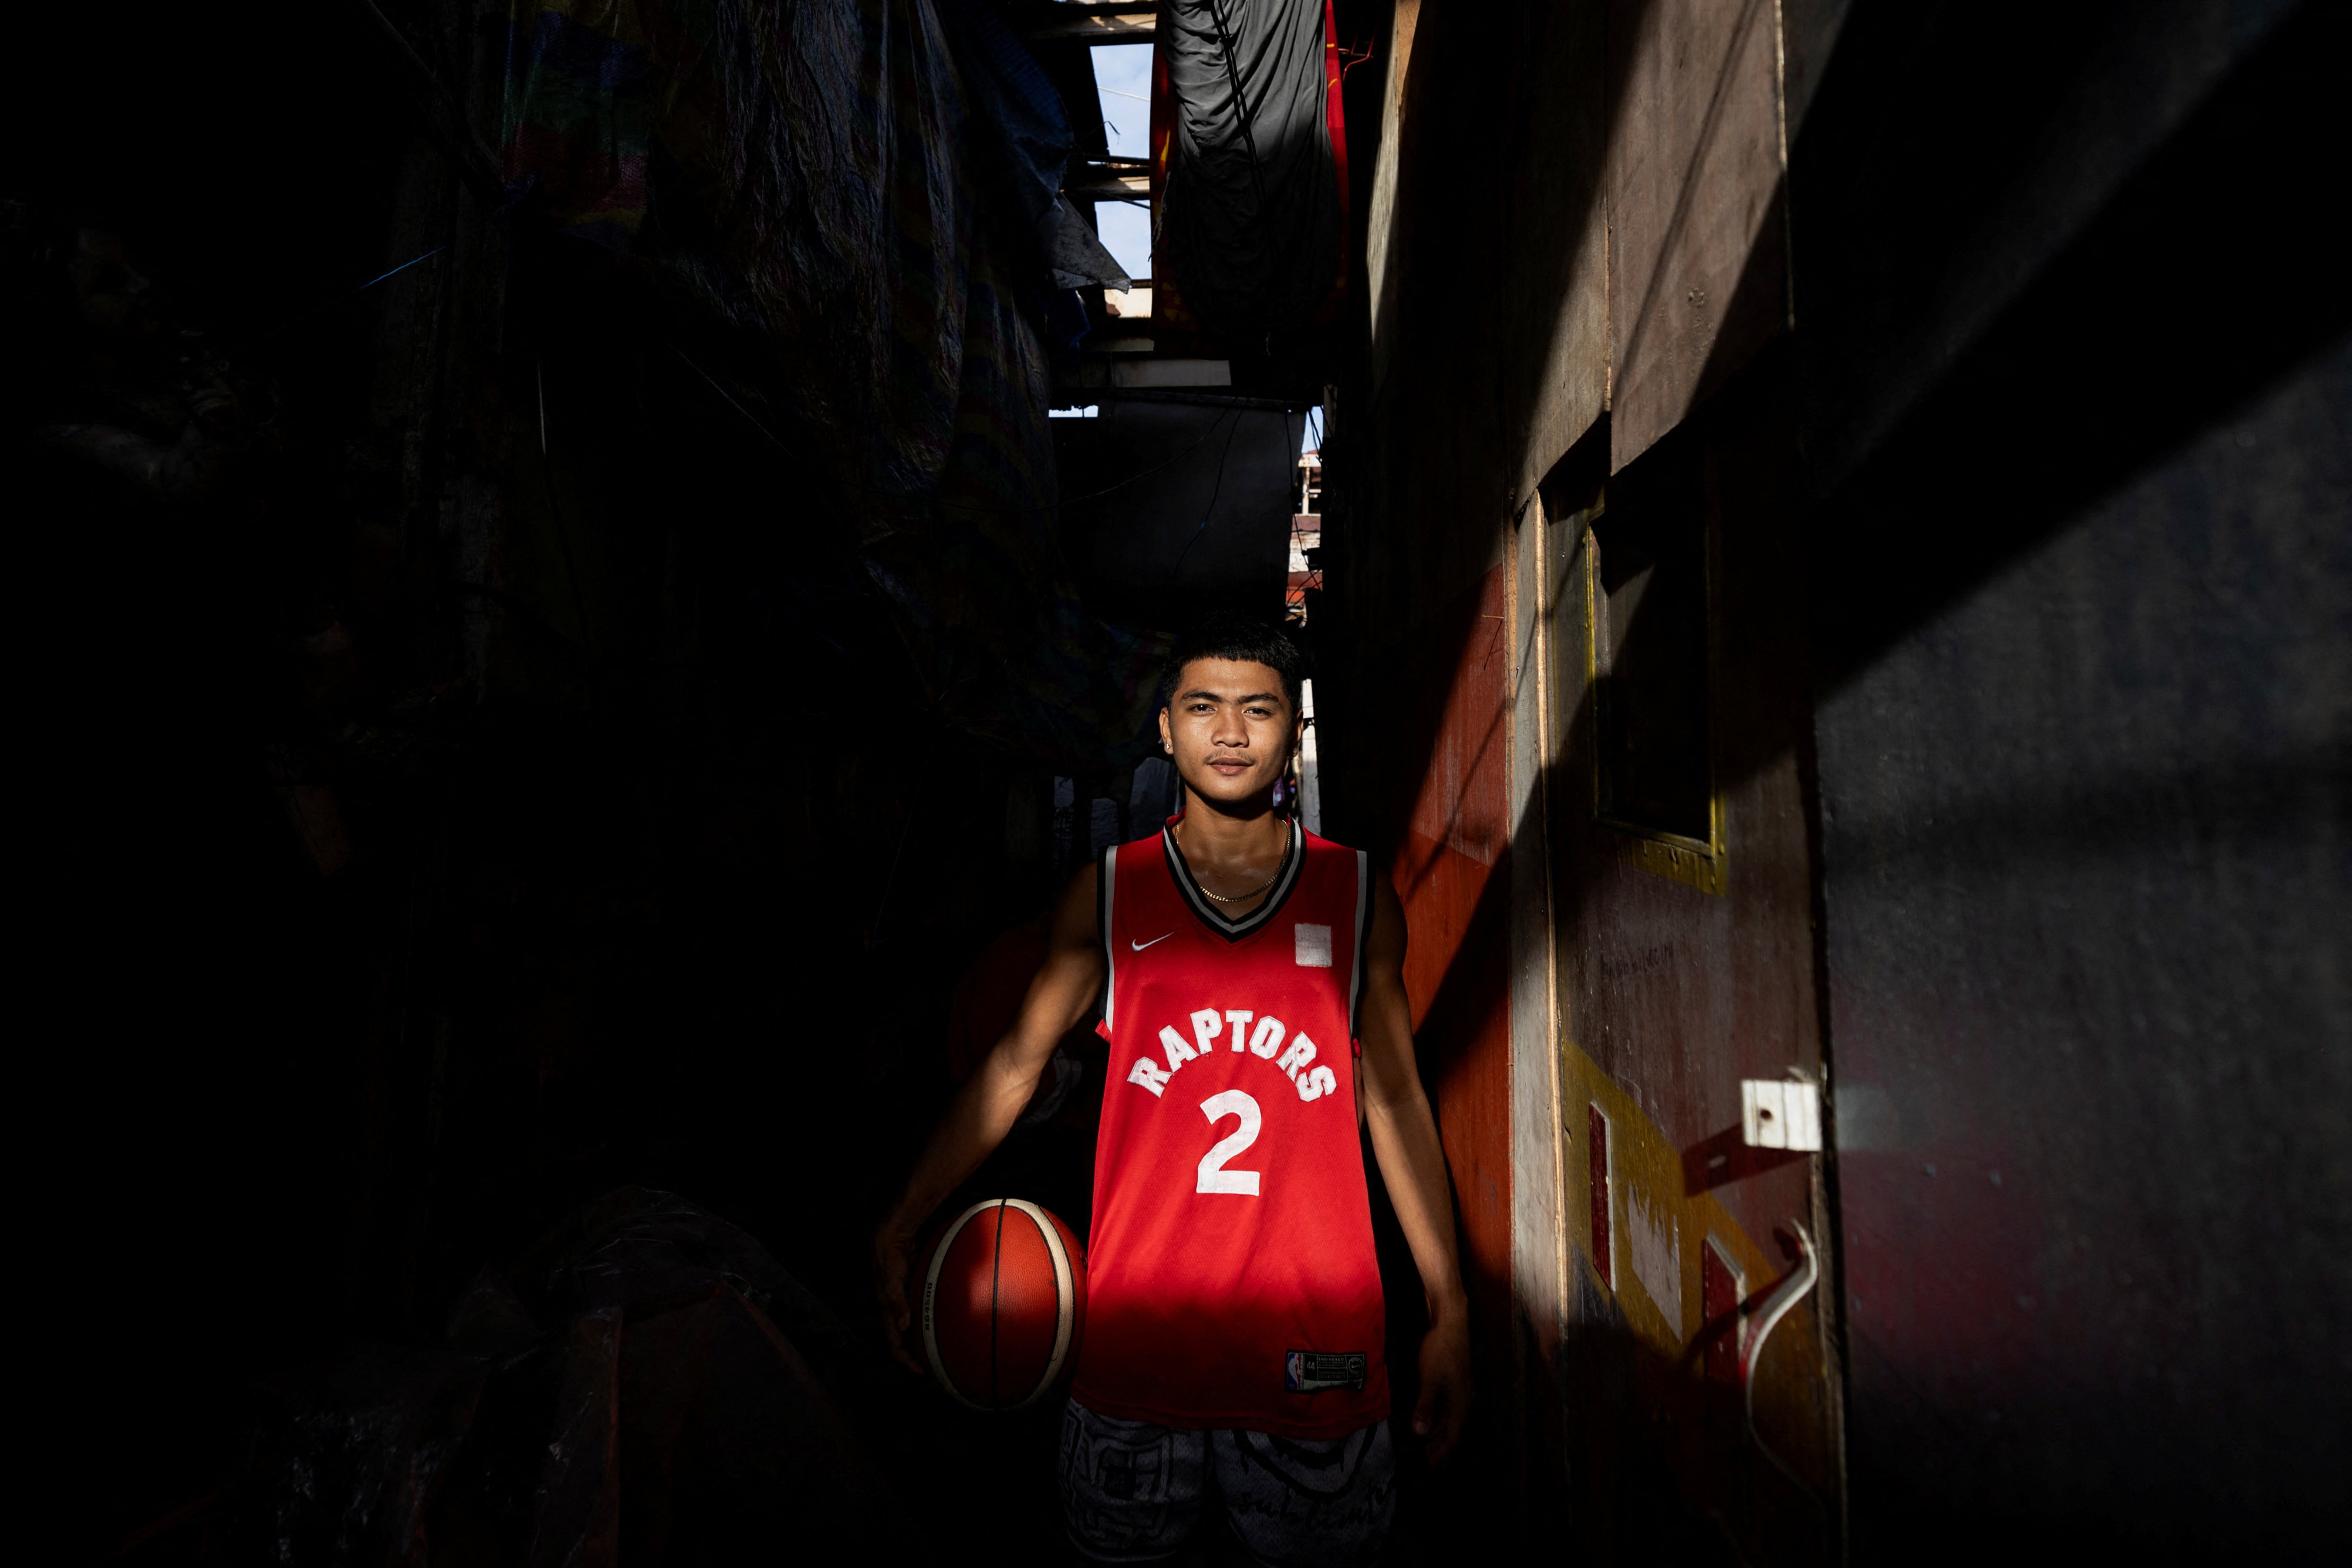 Jessie Conde, 18, a regular player at the community-built court Baryo Aroma, poses for a portrait outside his home in Tondo, Manila